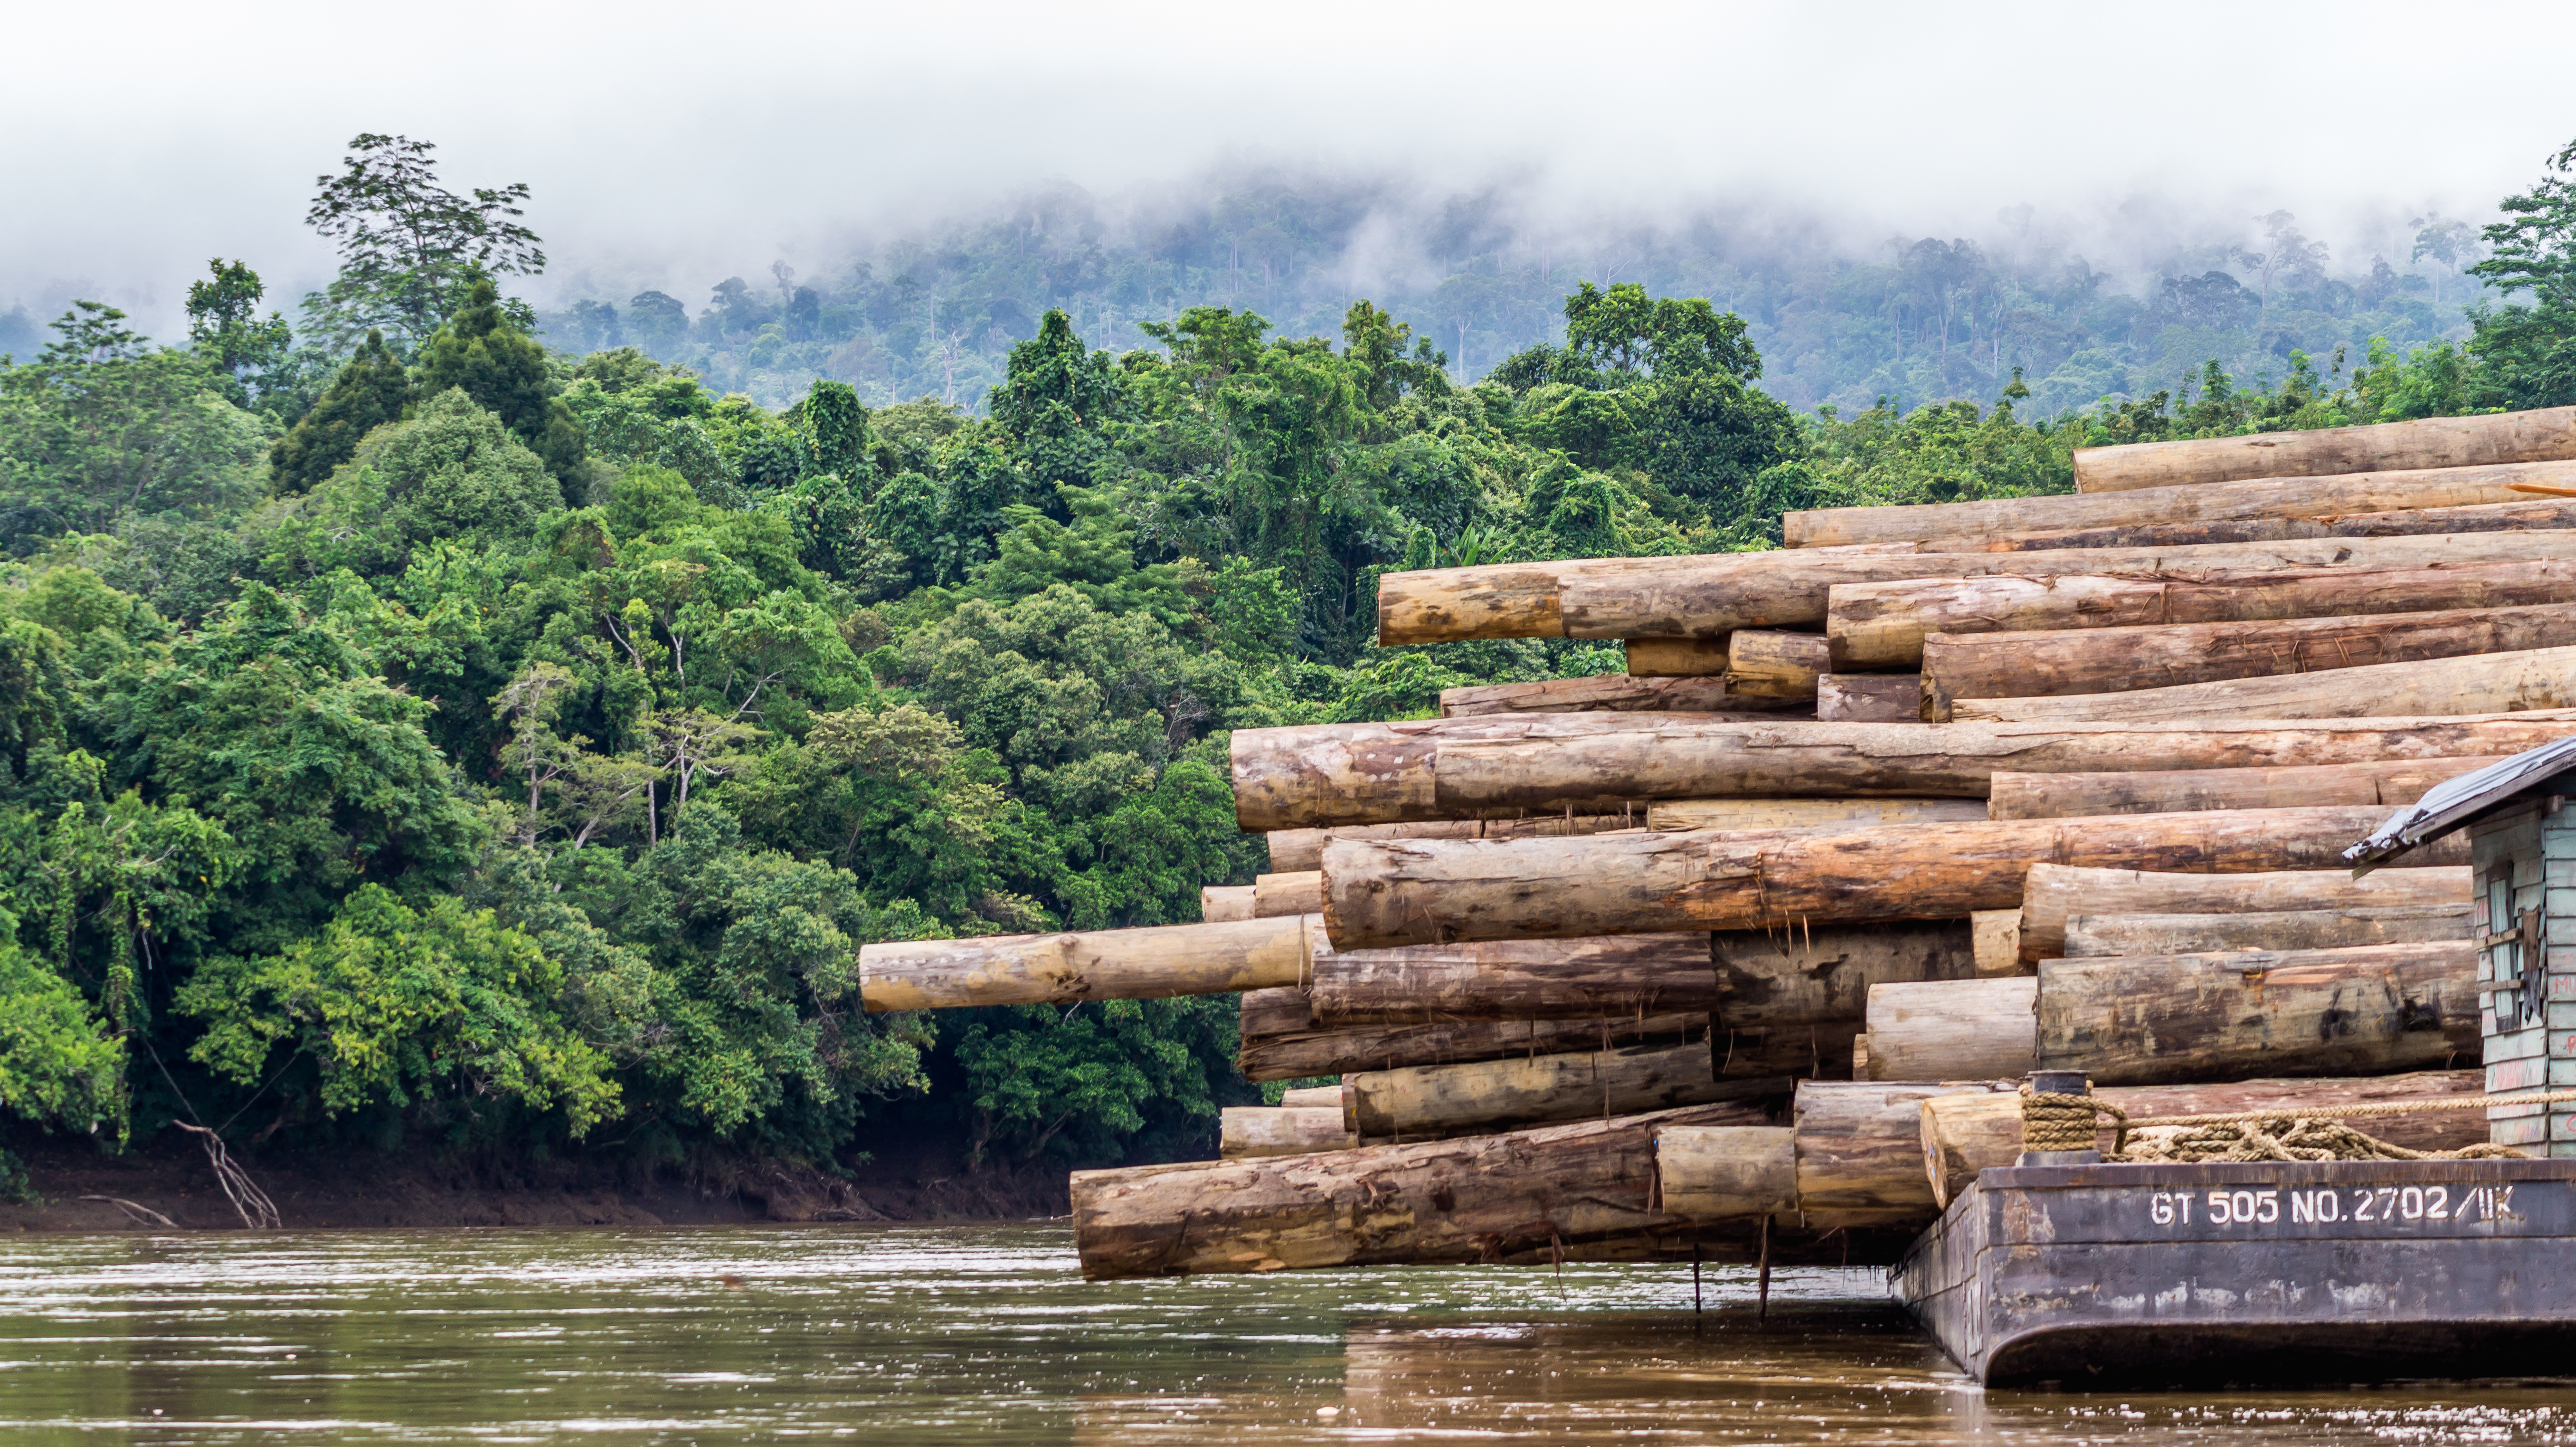 timber piled on boat in river with forest landscape in background